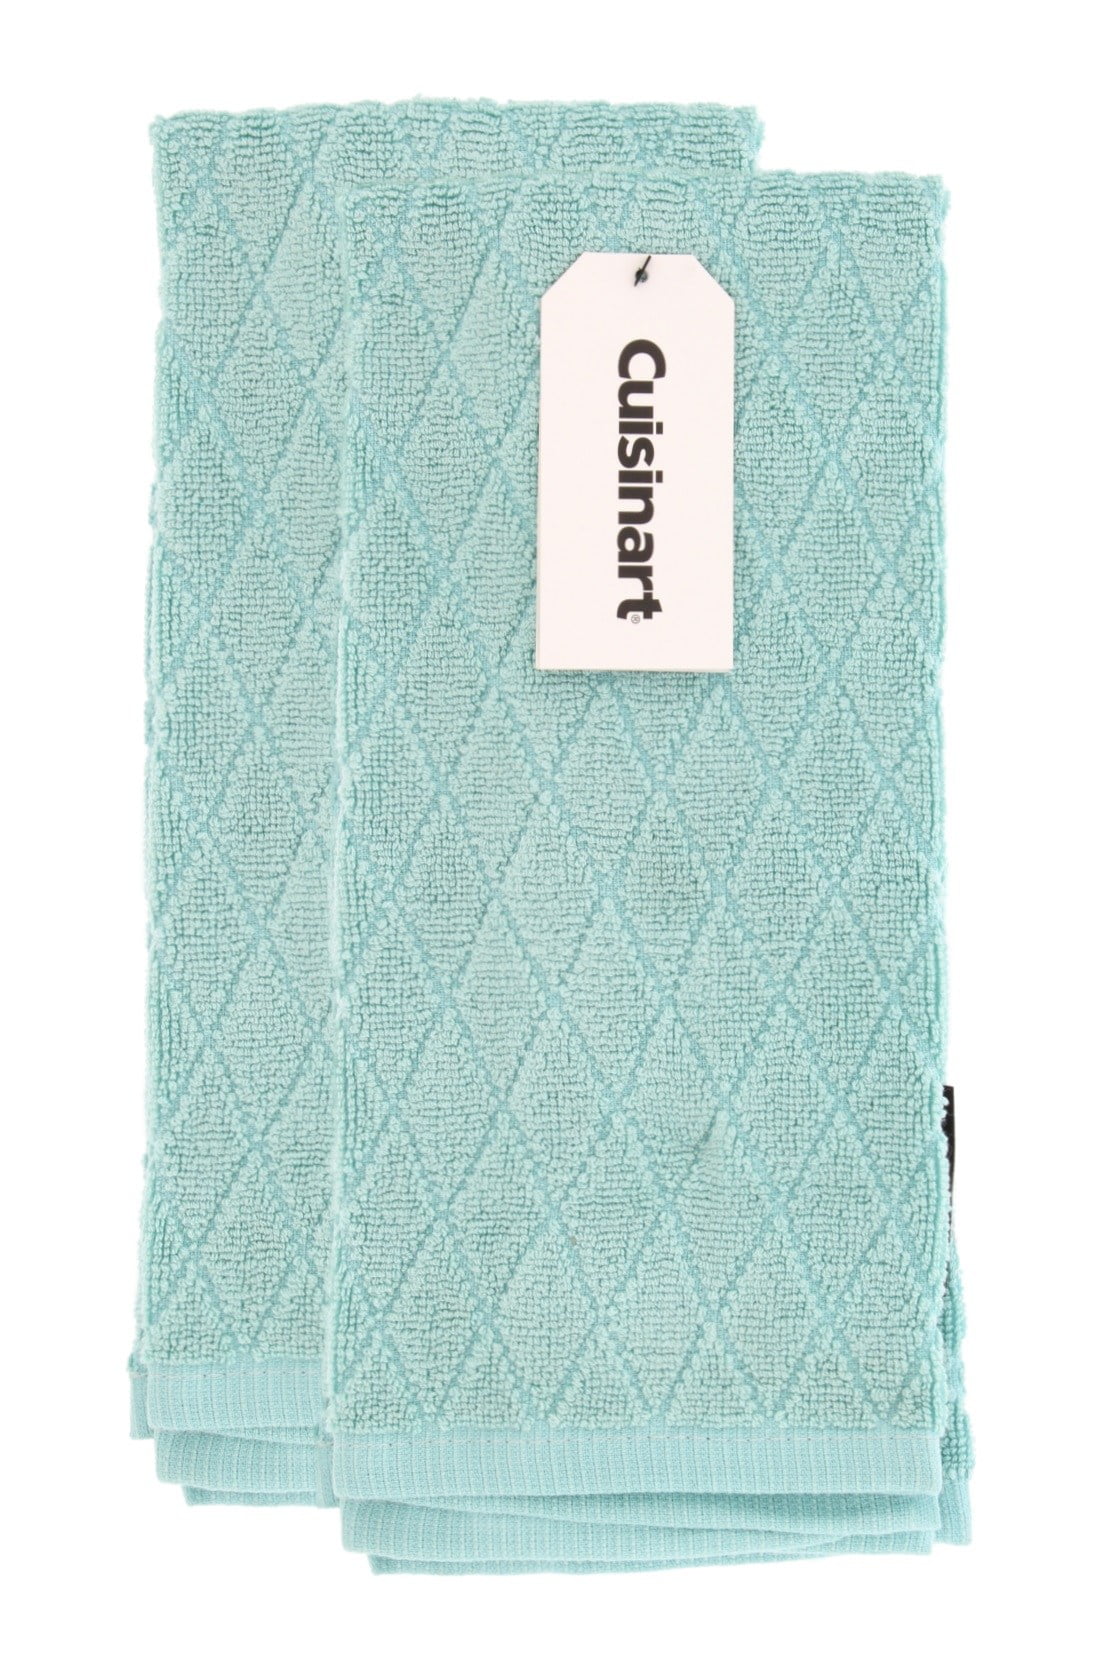 Cuisinart 100% Cotton Kitchen Towels, 2pk-Soft, Absorbent, Bleach Safe Dish  Towels Perfect for Everyday Use-Bleach Proof Towels Remain Vibrant and